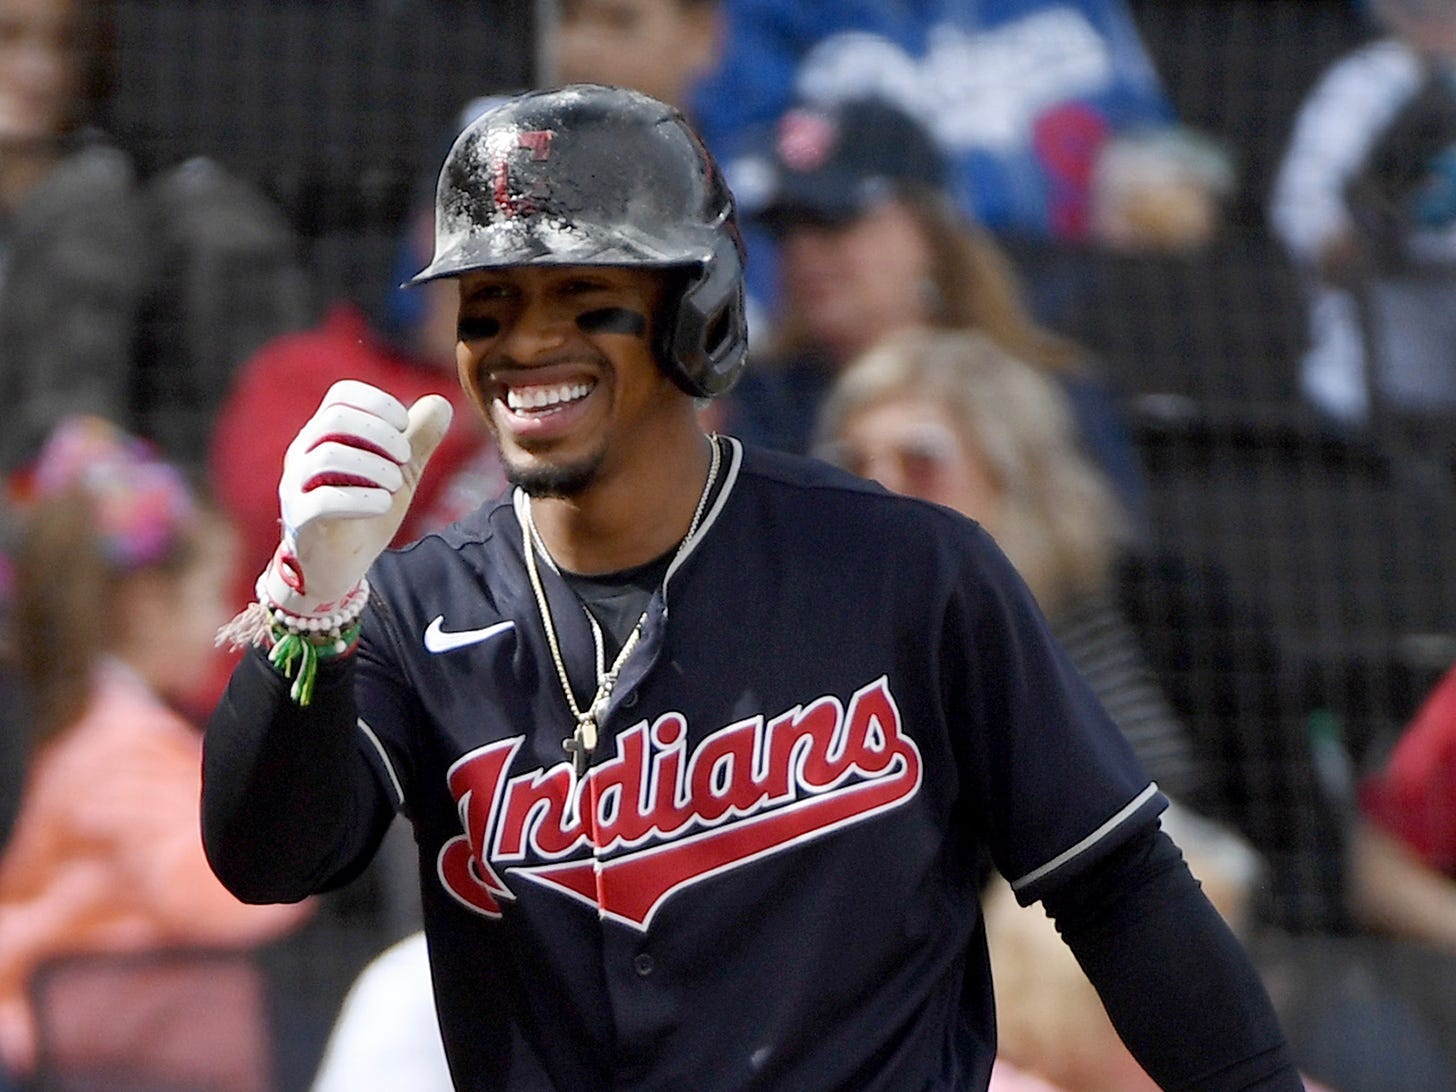 Different season, same rumors about Cleveland Indians' Francisco Lindor:  The week in baseball - cleveland.com